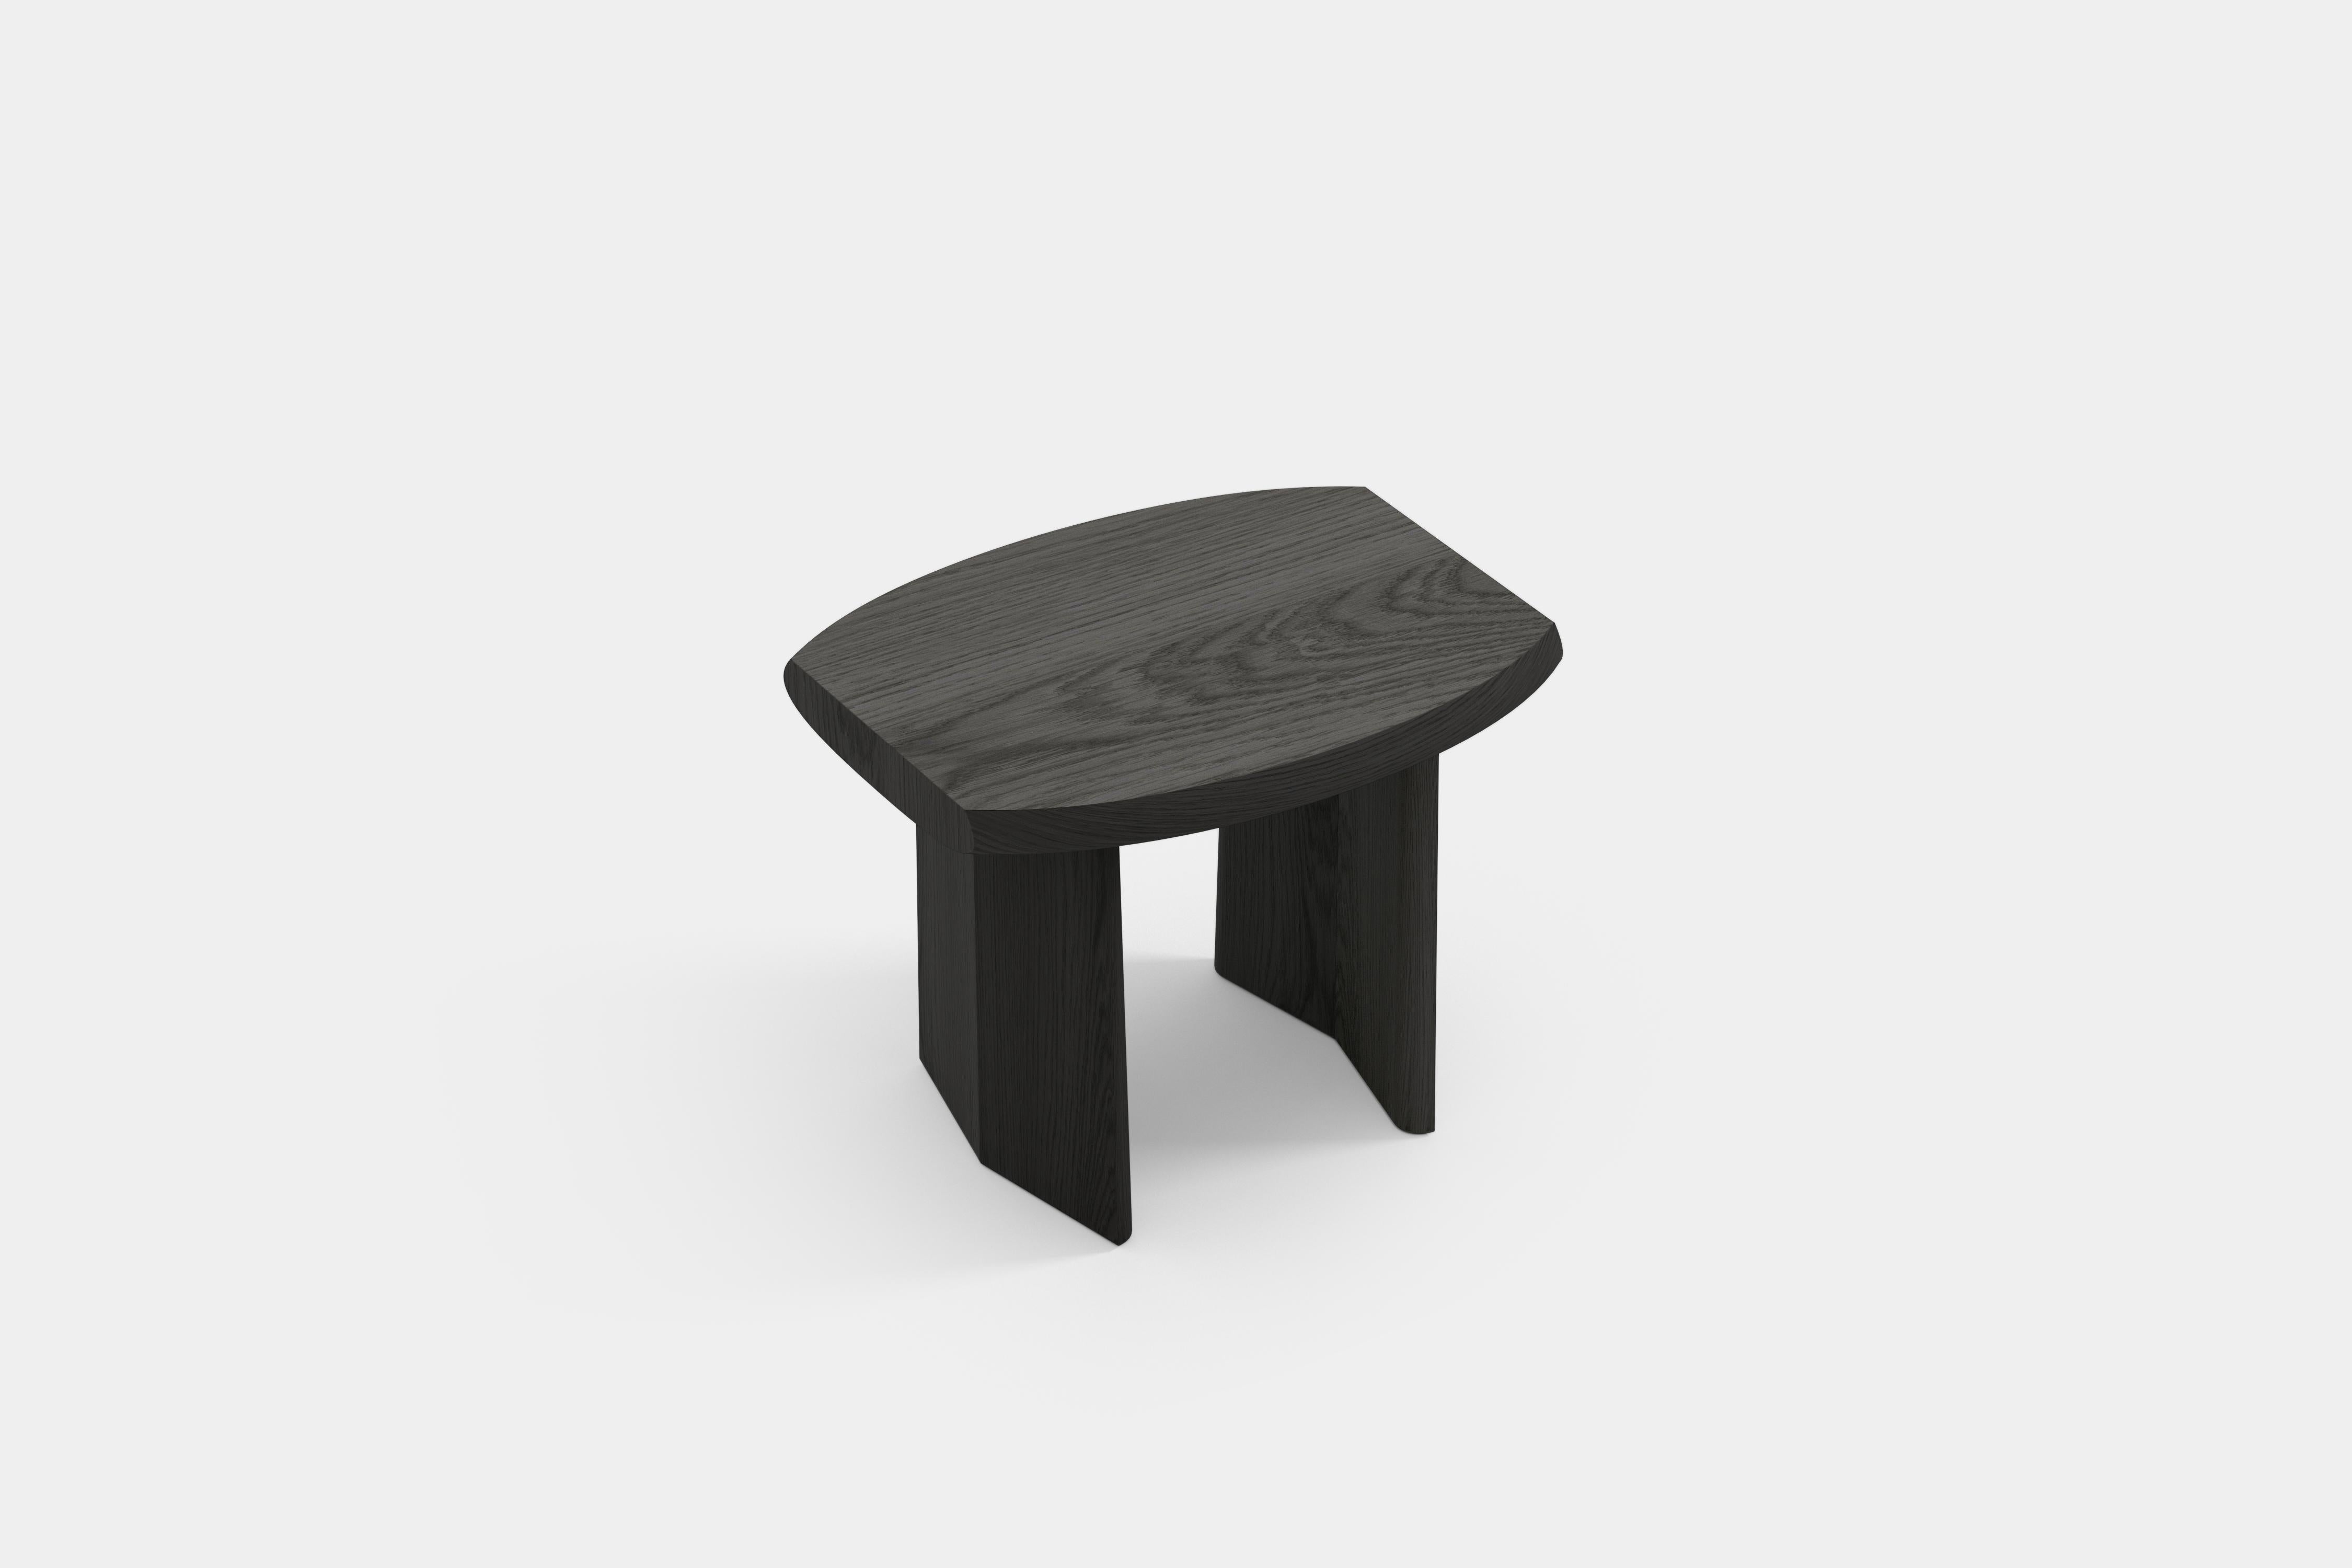 Set of two peana side table, night stand in black tinted wood by Joel Escalona

Peana, which in English translates to base or pedestal, is a series of tables and different surfaces inspired by the idea of creating worthy furniture pieces to place